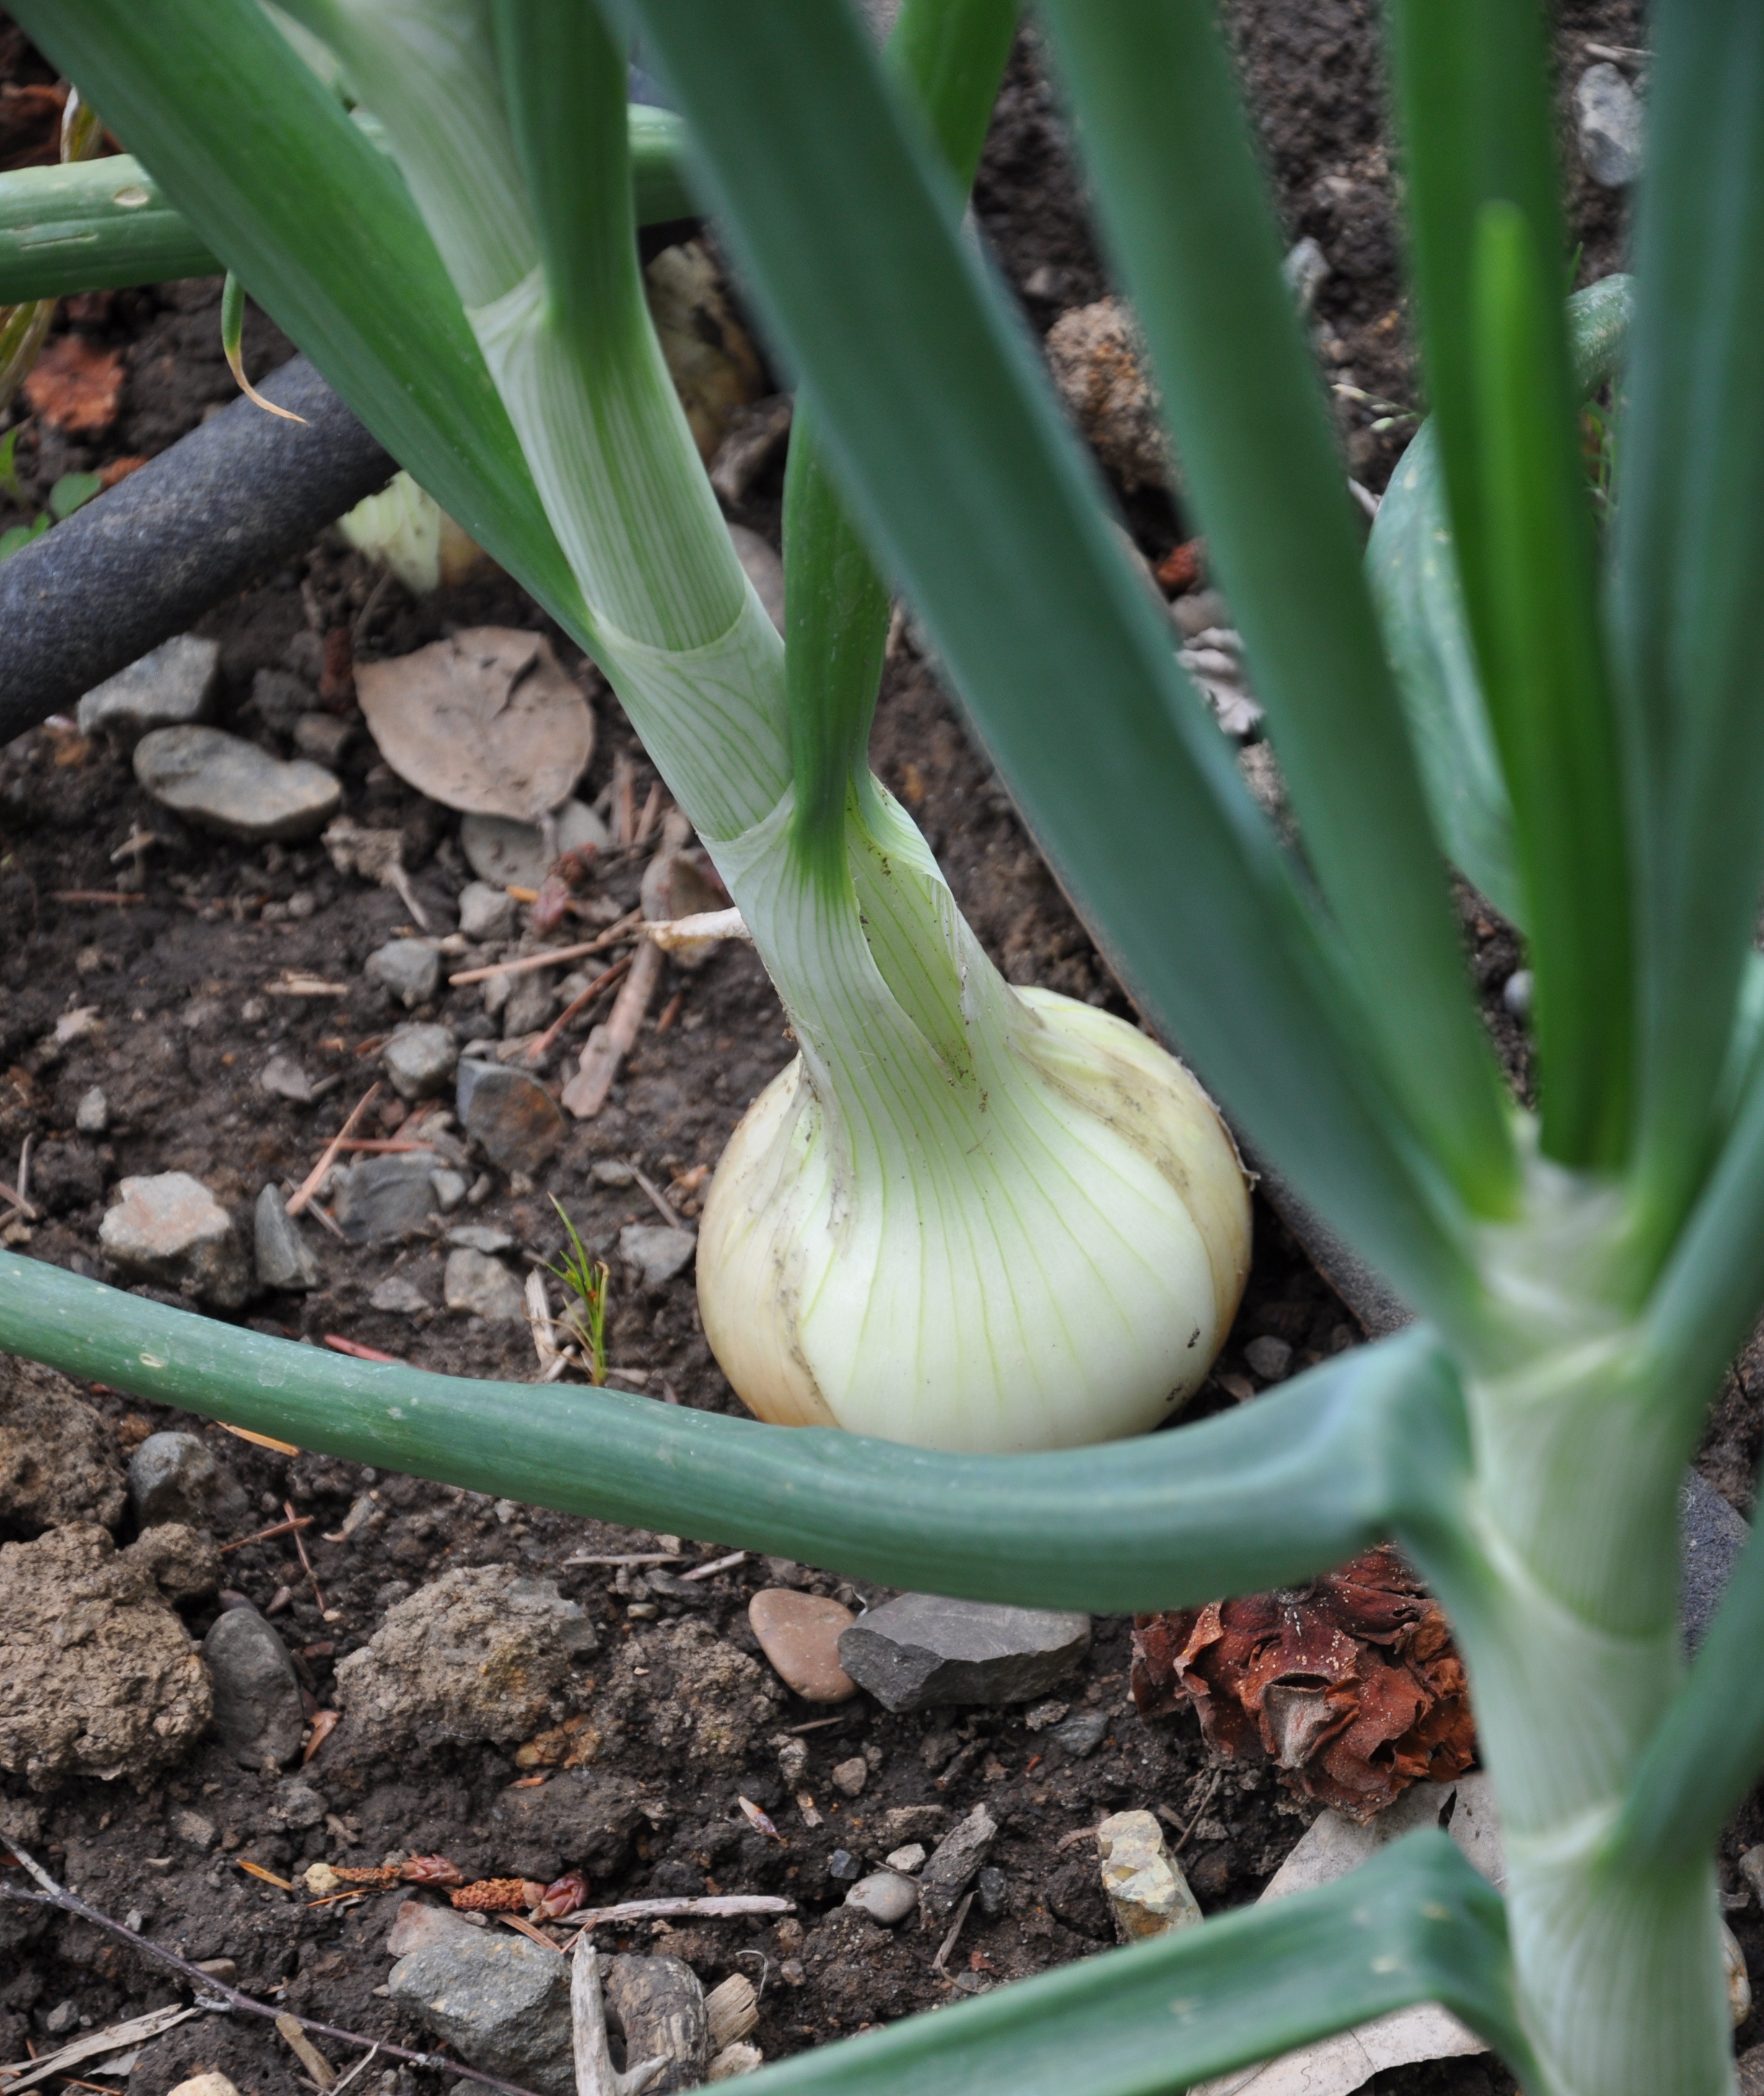 Plant early for bigger onions